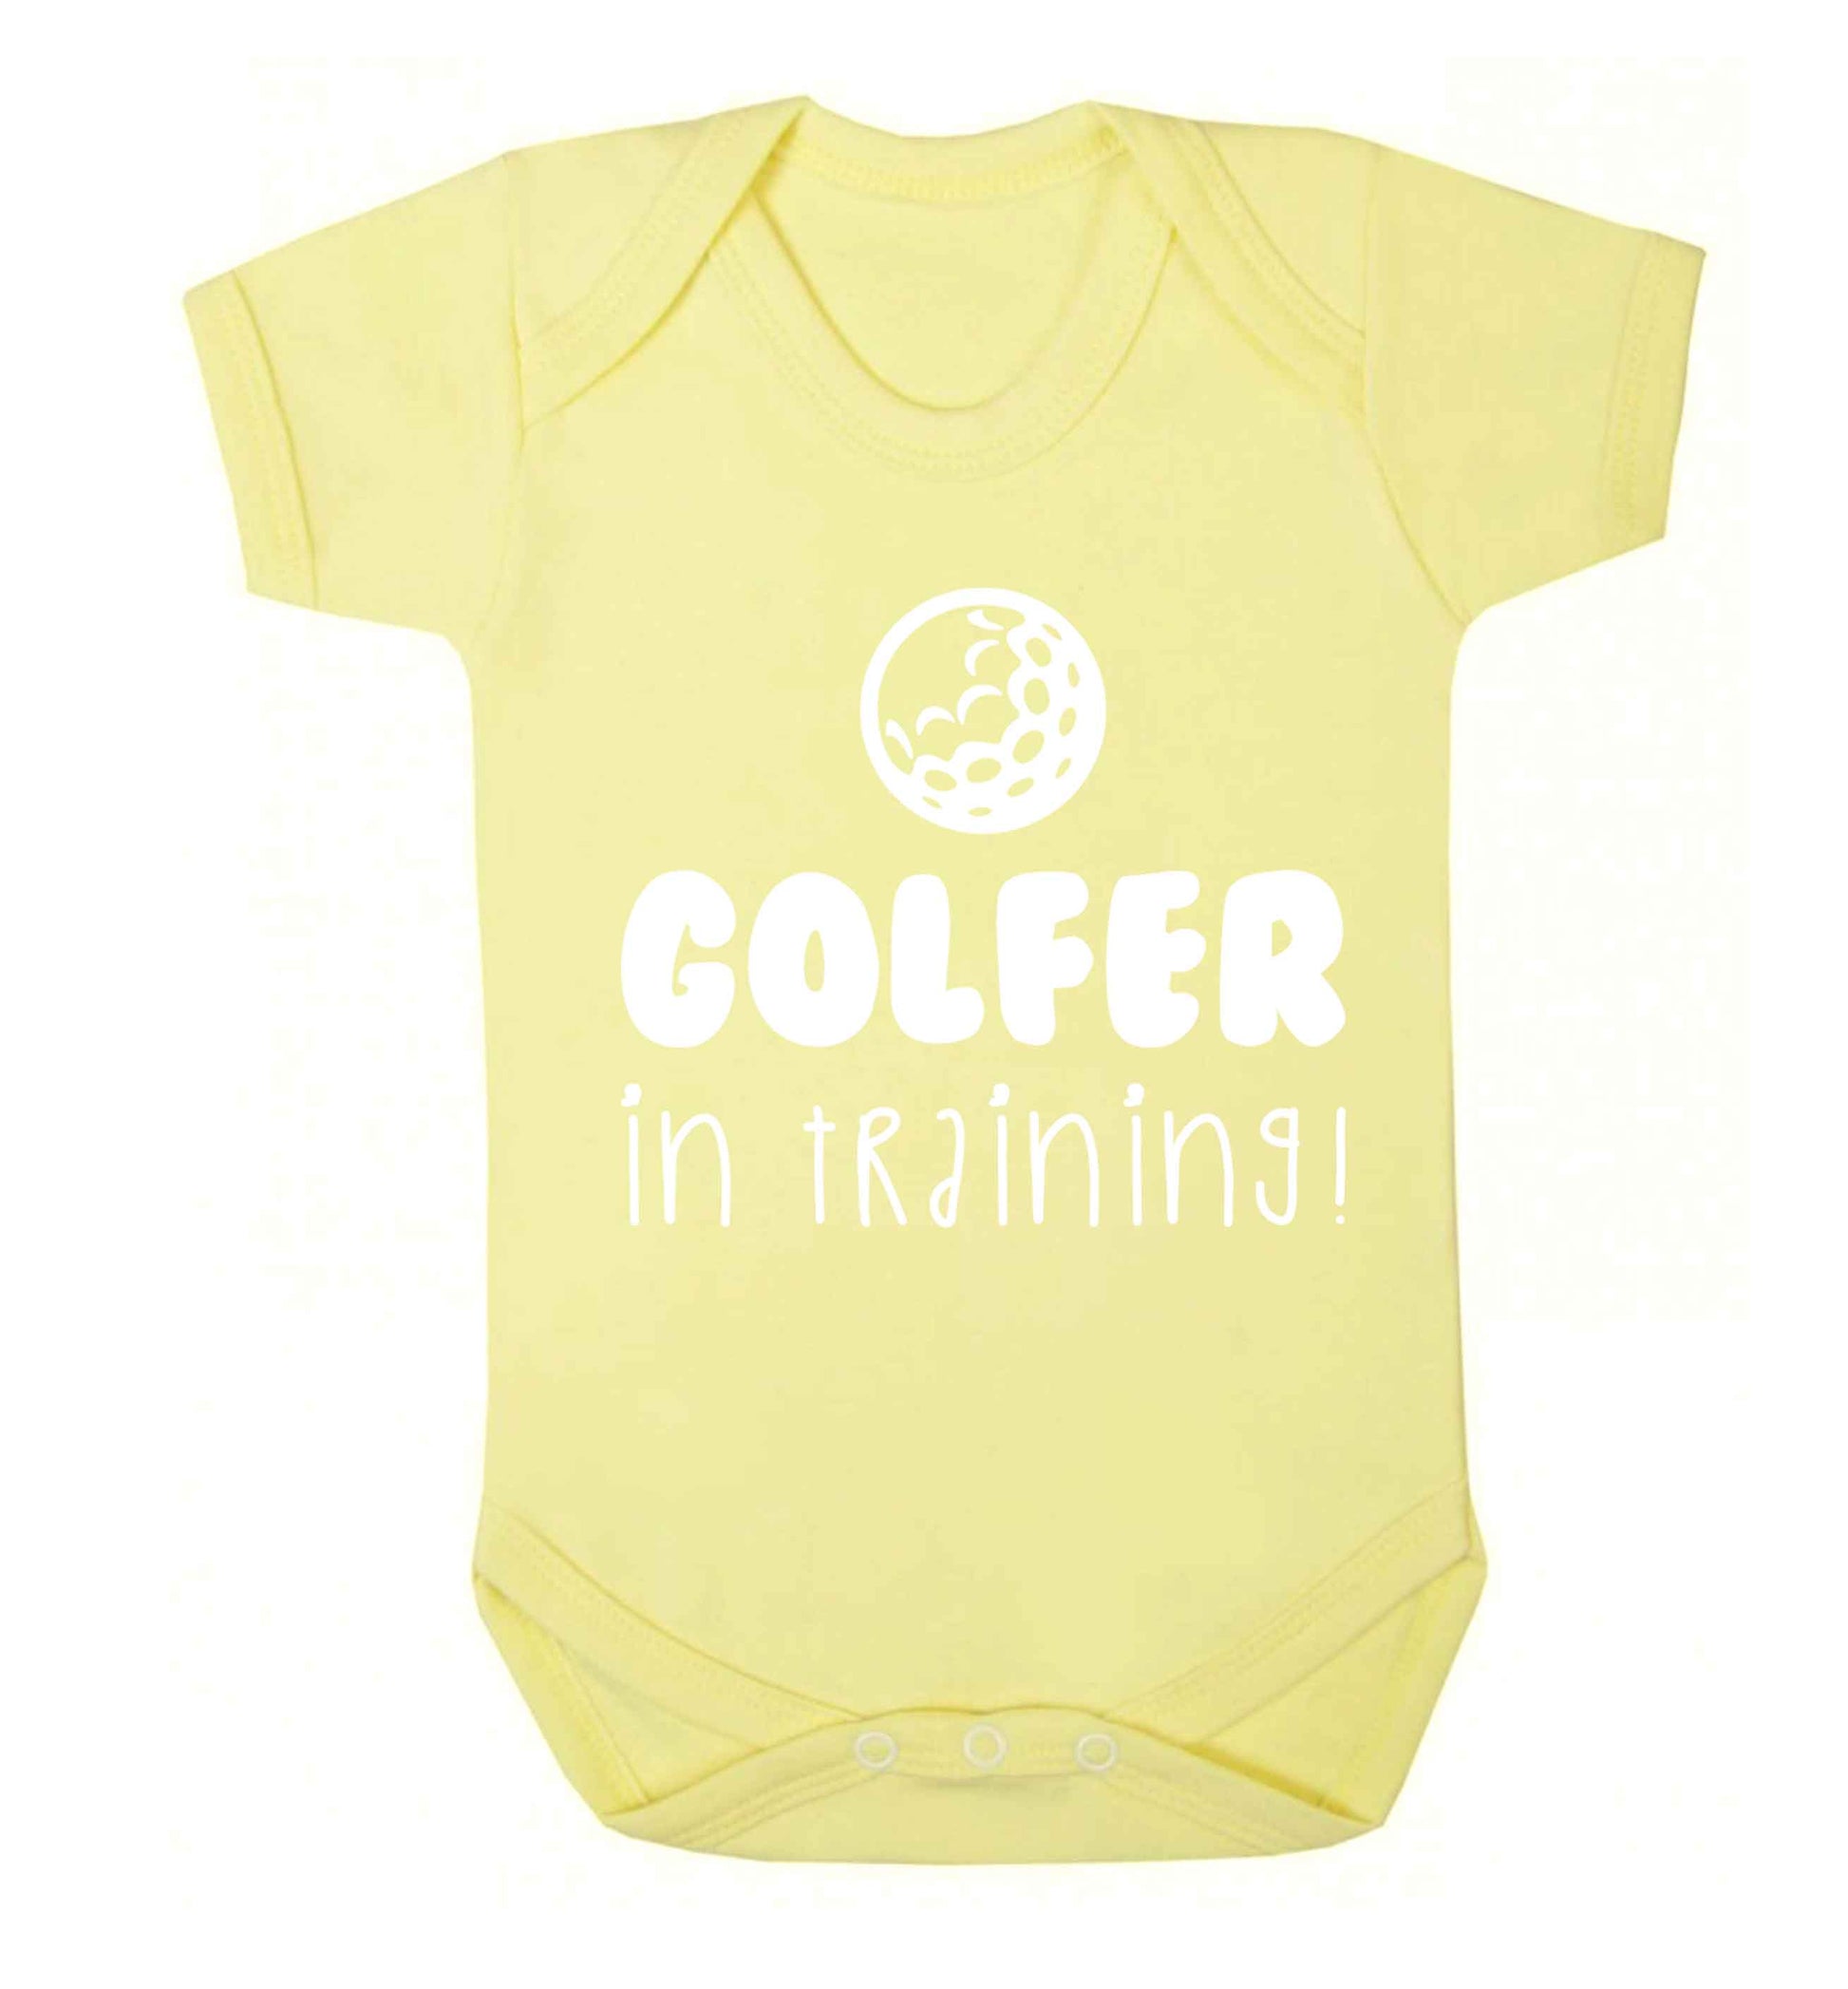 Golfer in training Baby Vest pale yellow 18-24 months